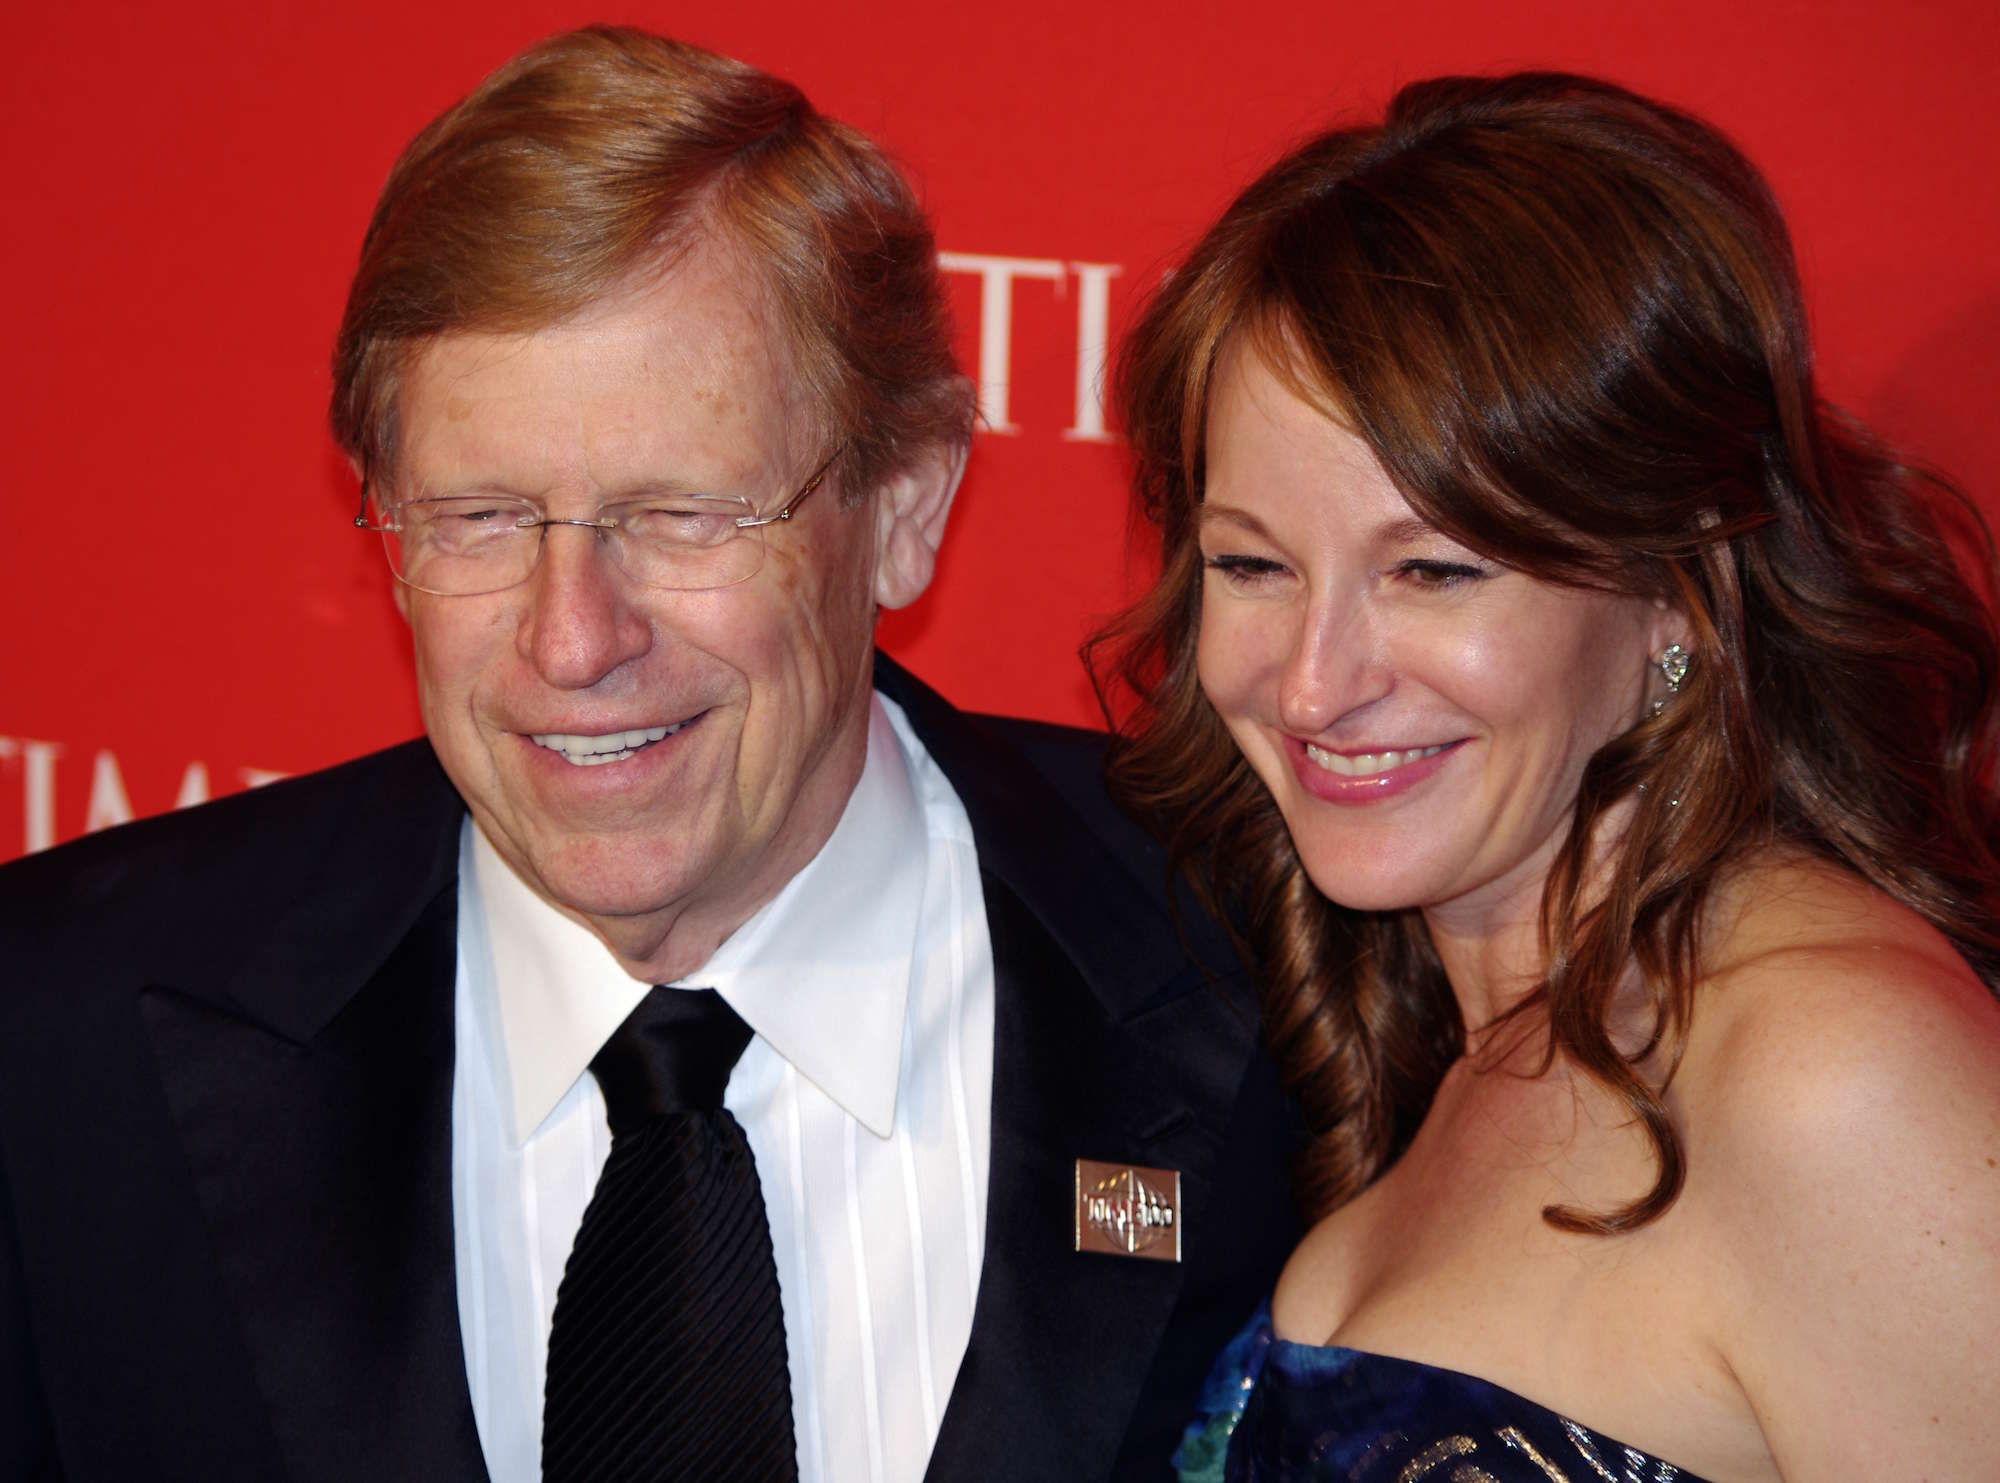 Ted Olson is one of the top legal minds in the country.